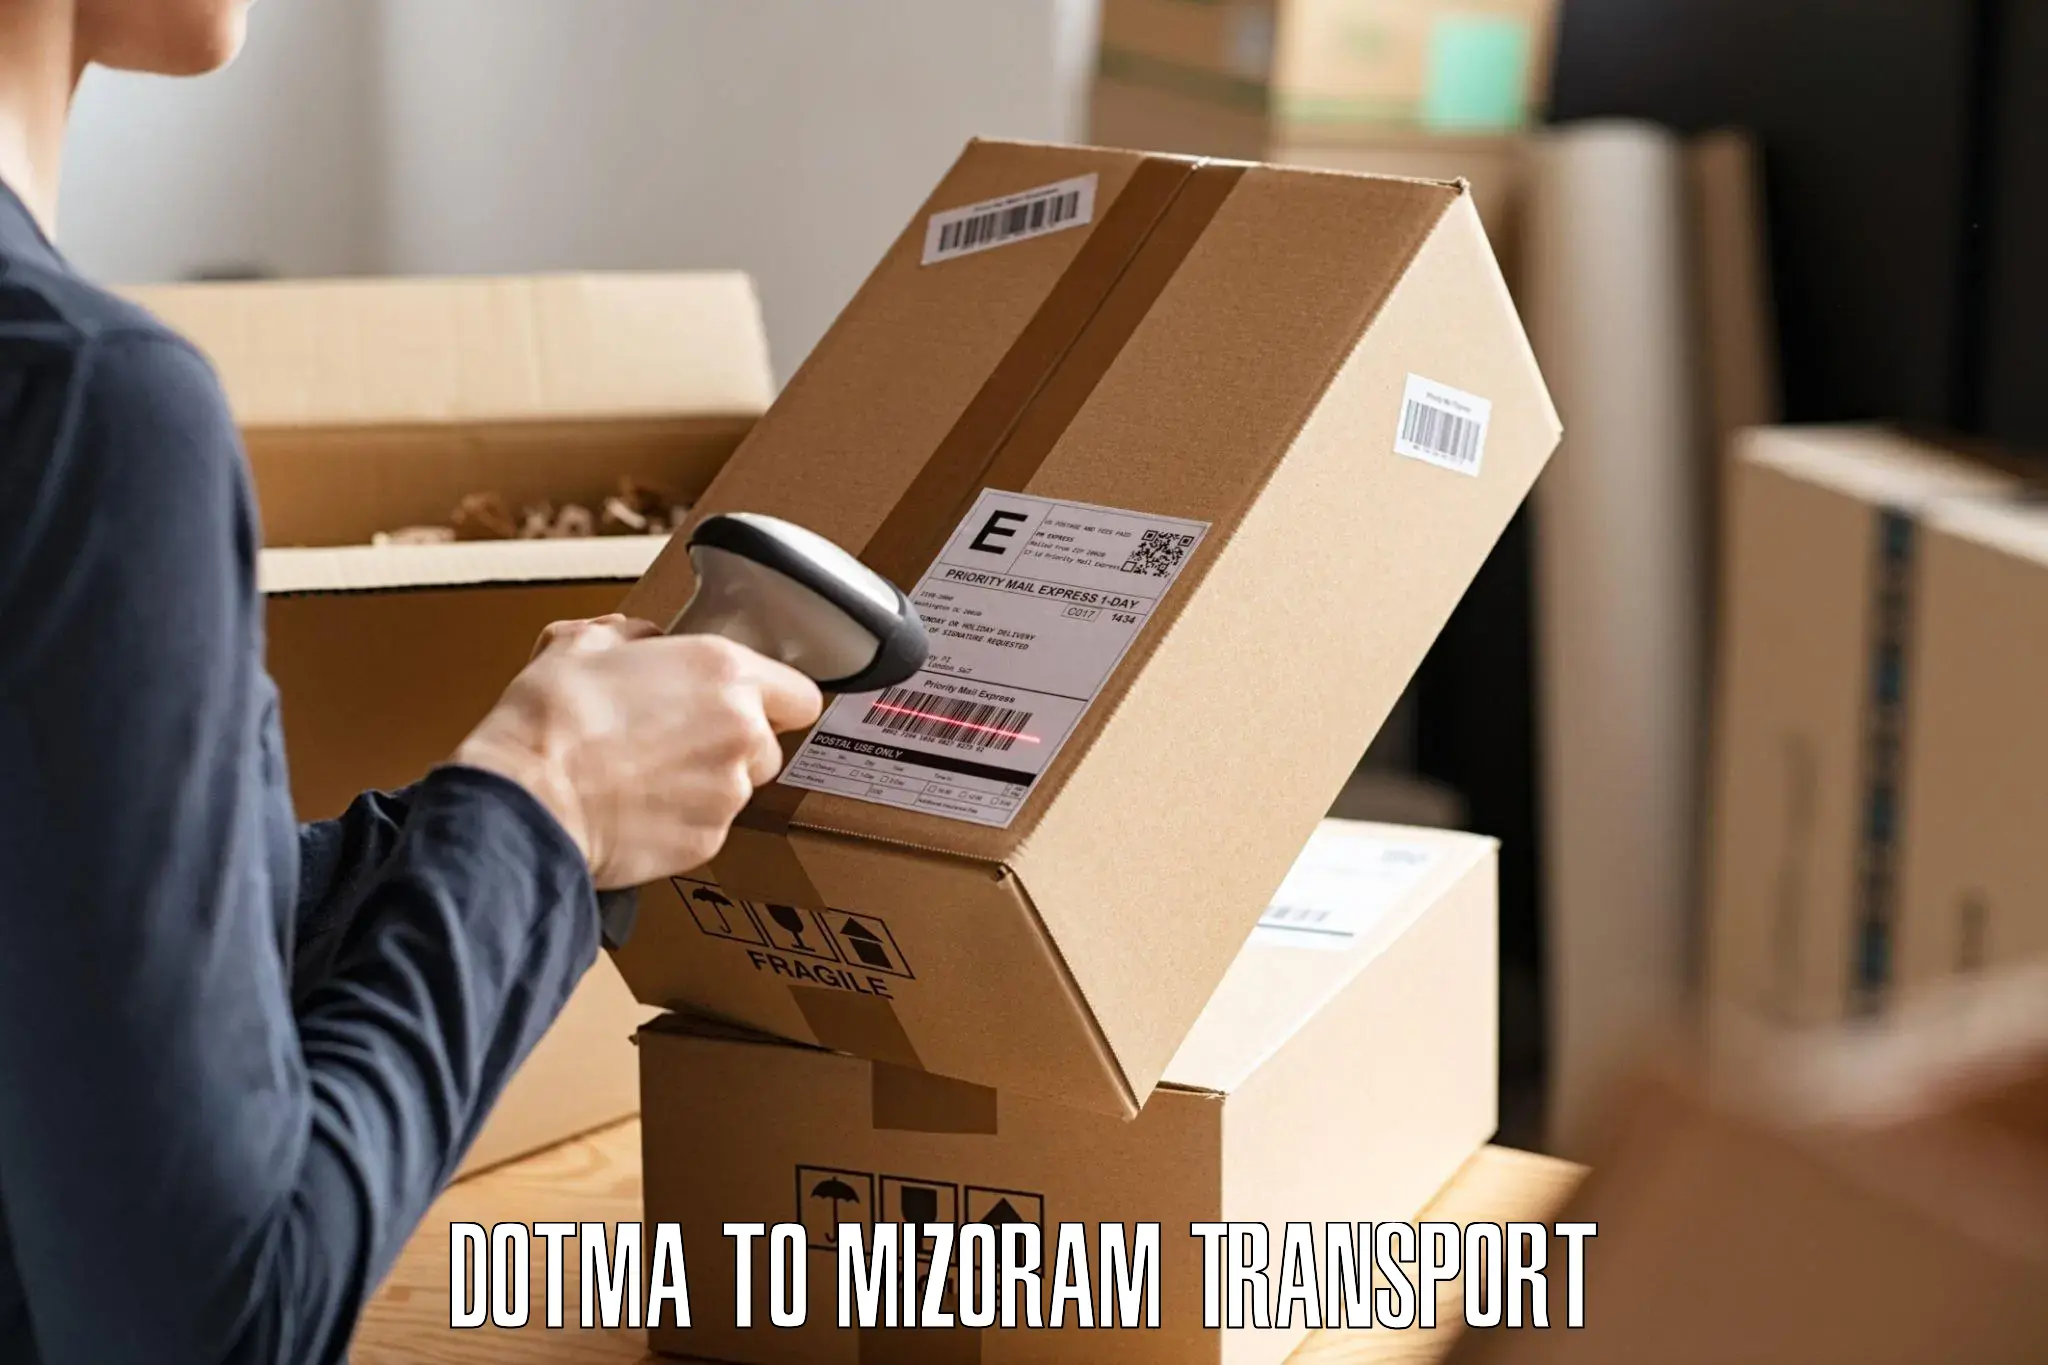 Interstate transport services Dotma to Hnahthial